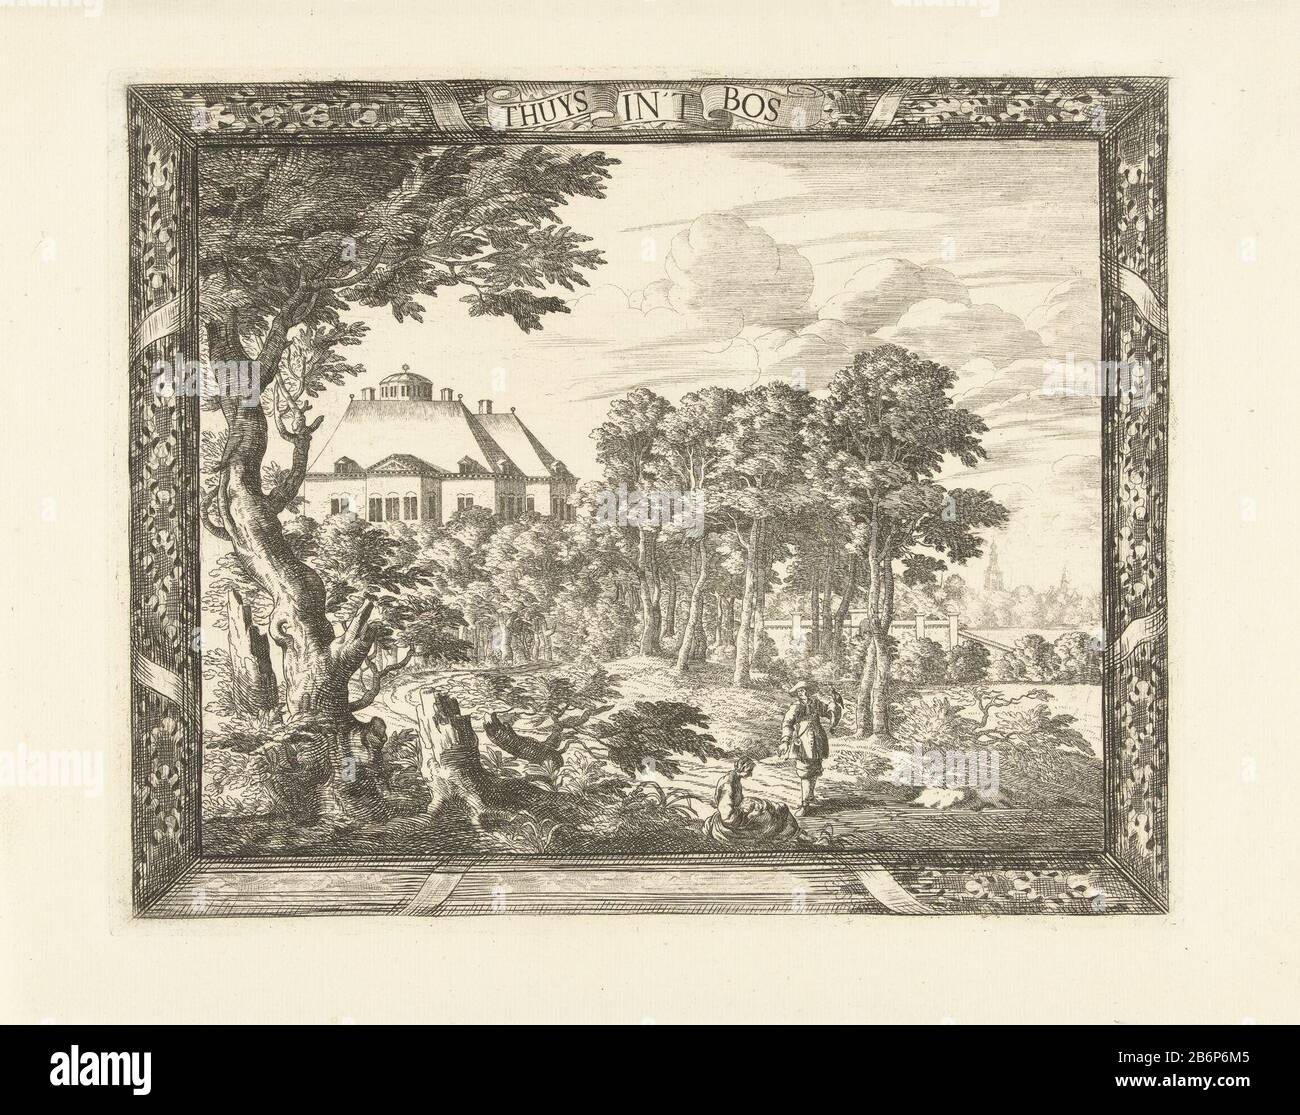 Gezicht op Huis ten Bosch T' Huys in 't Bos (titel op object) View Huis ten Bosch, the trees. In the foreground, a falconer and a woman sitting on the ground. The performance is framed by a border with oak leaf motifs and a band bearing thereon the titel. Manufacturer : print maker: Cornelis ElandtsPlaats manufacture: The Hague Date: 1681 - 1728 Material: paper Technique: etching dimensions: plate edge: H 230 mm × W 284 mmToelichtingDeze print is initially issued as a part of the edge of the so-called map of figurative Den Haag from 1681-1682 (see RP-P-AO-12-9D). The edge was a view of the cit Stock Photo